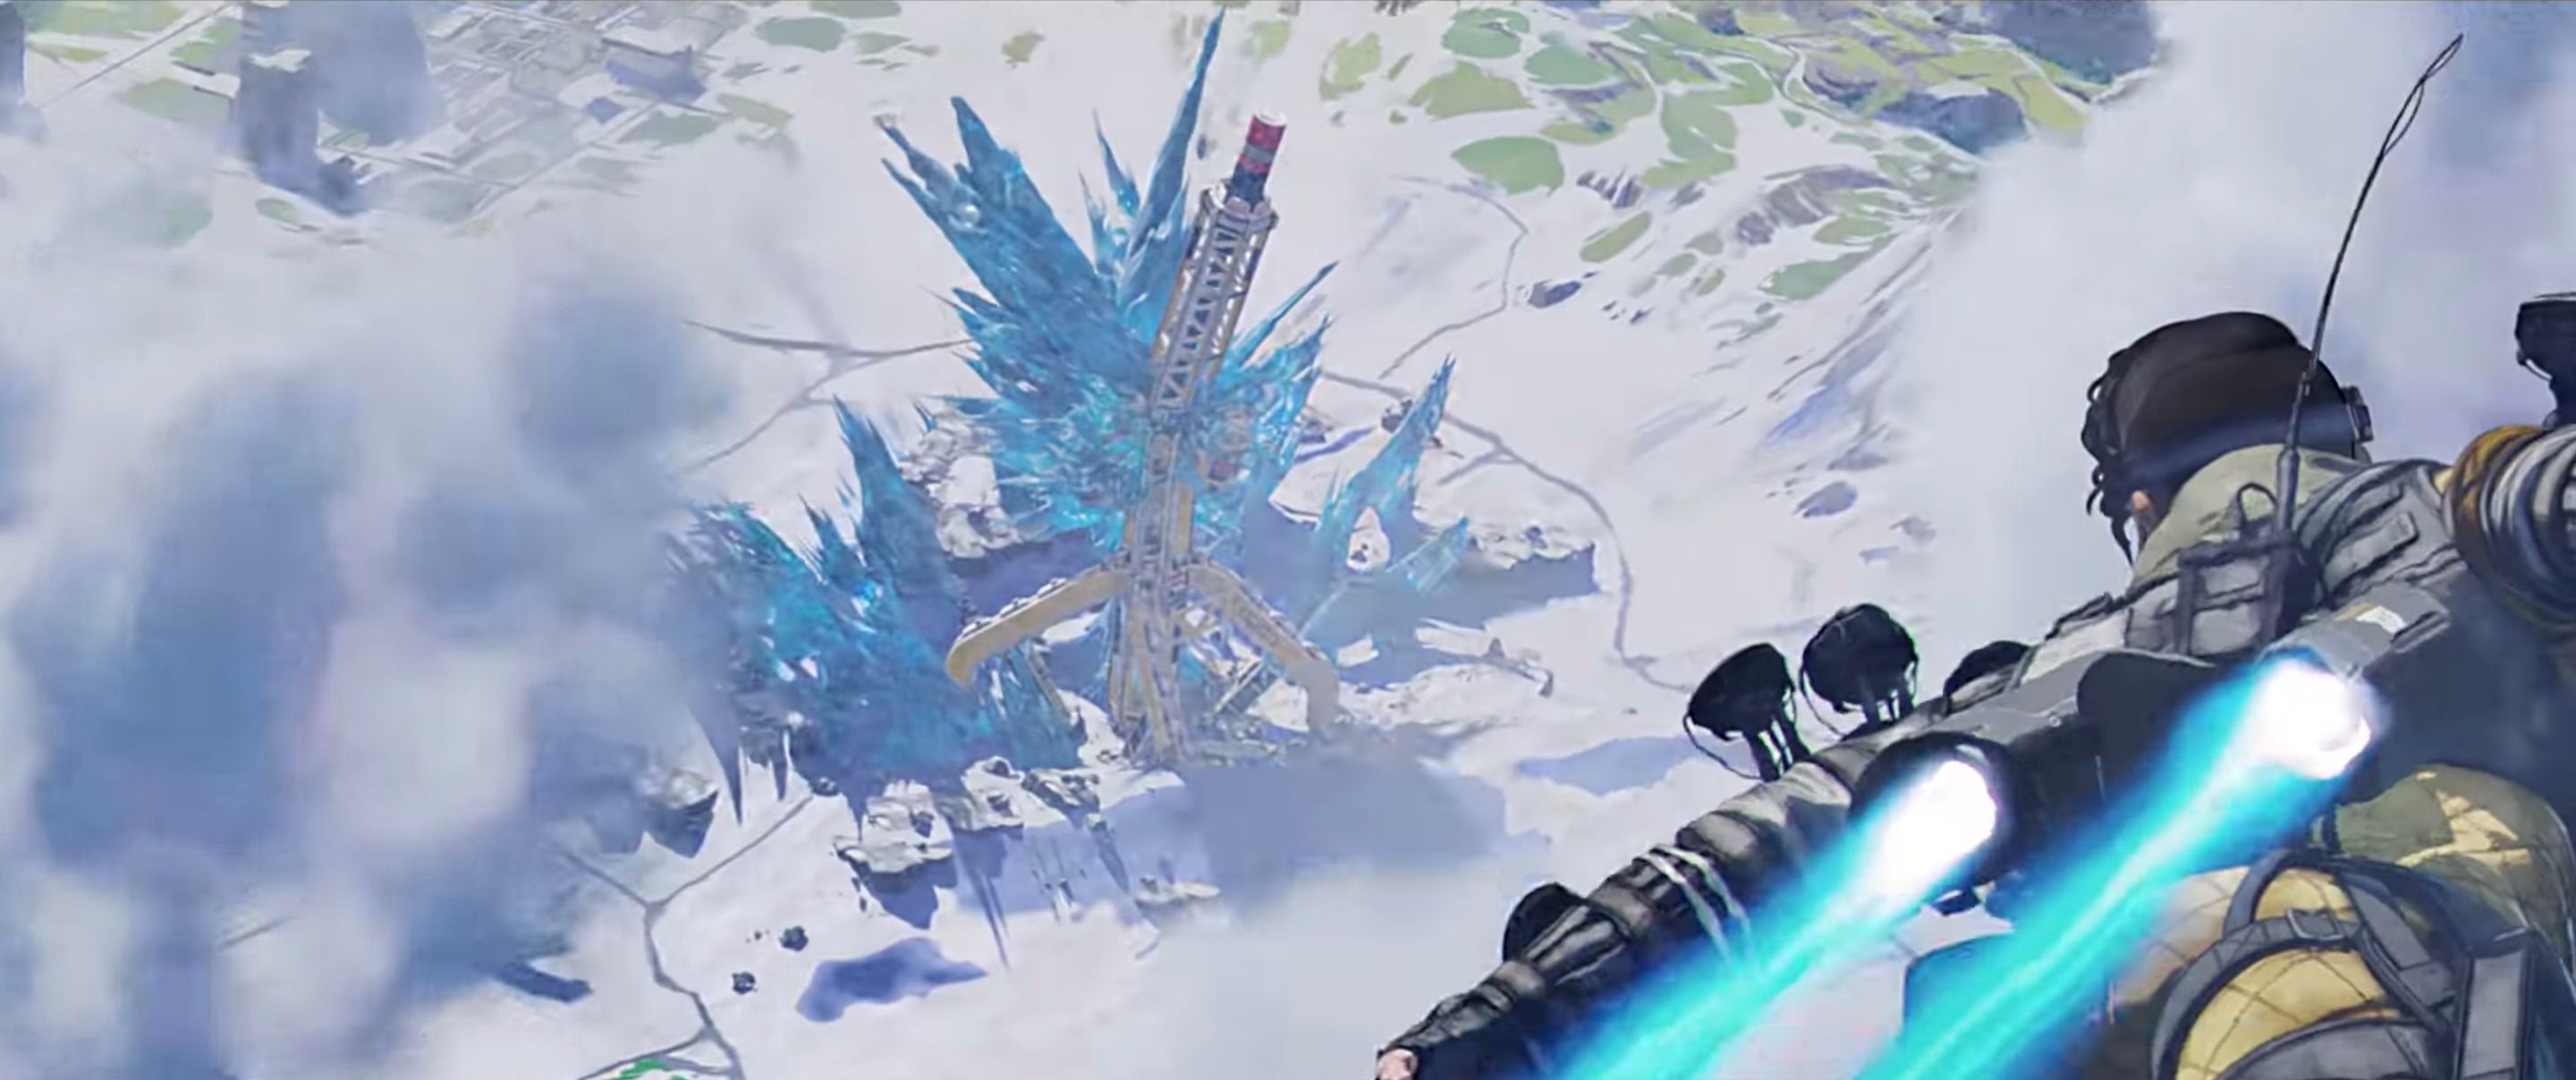 Apex Legends Season 3 Trailer Everything We Learned About The New Map